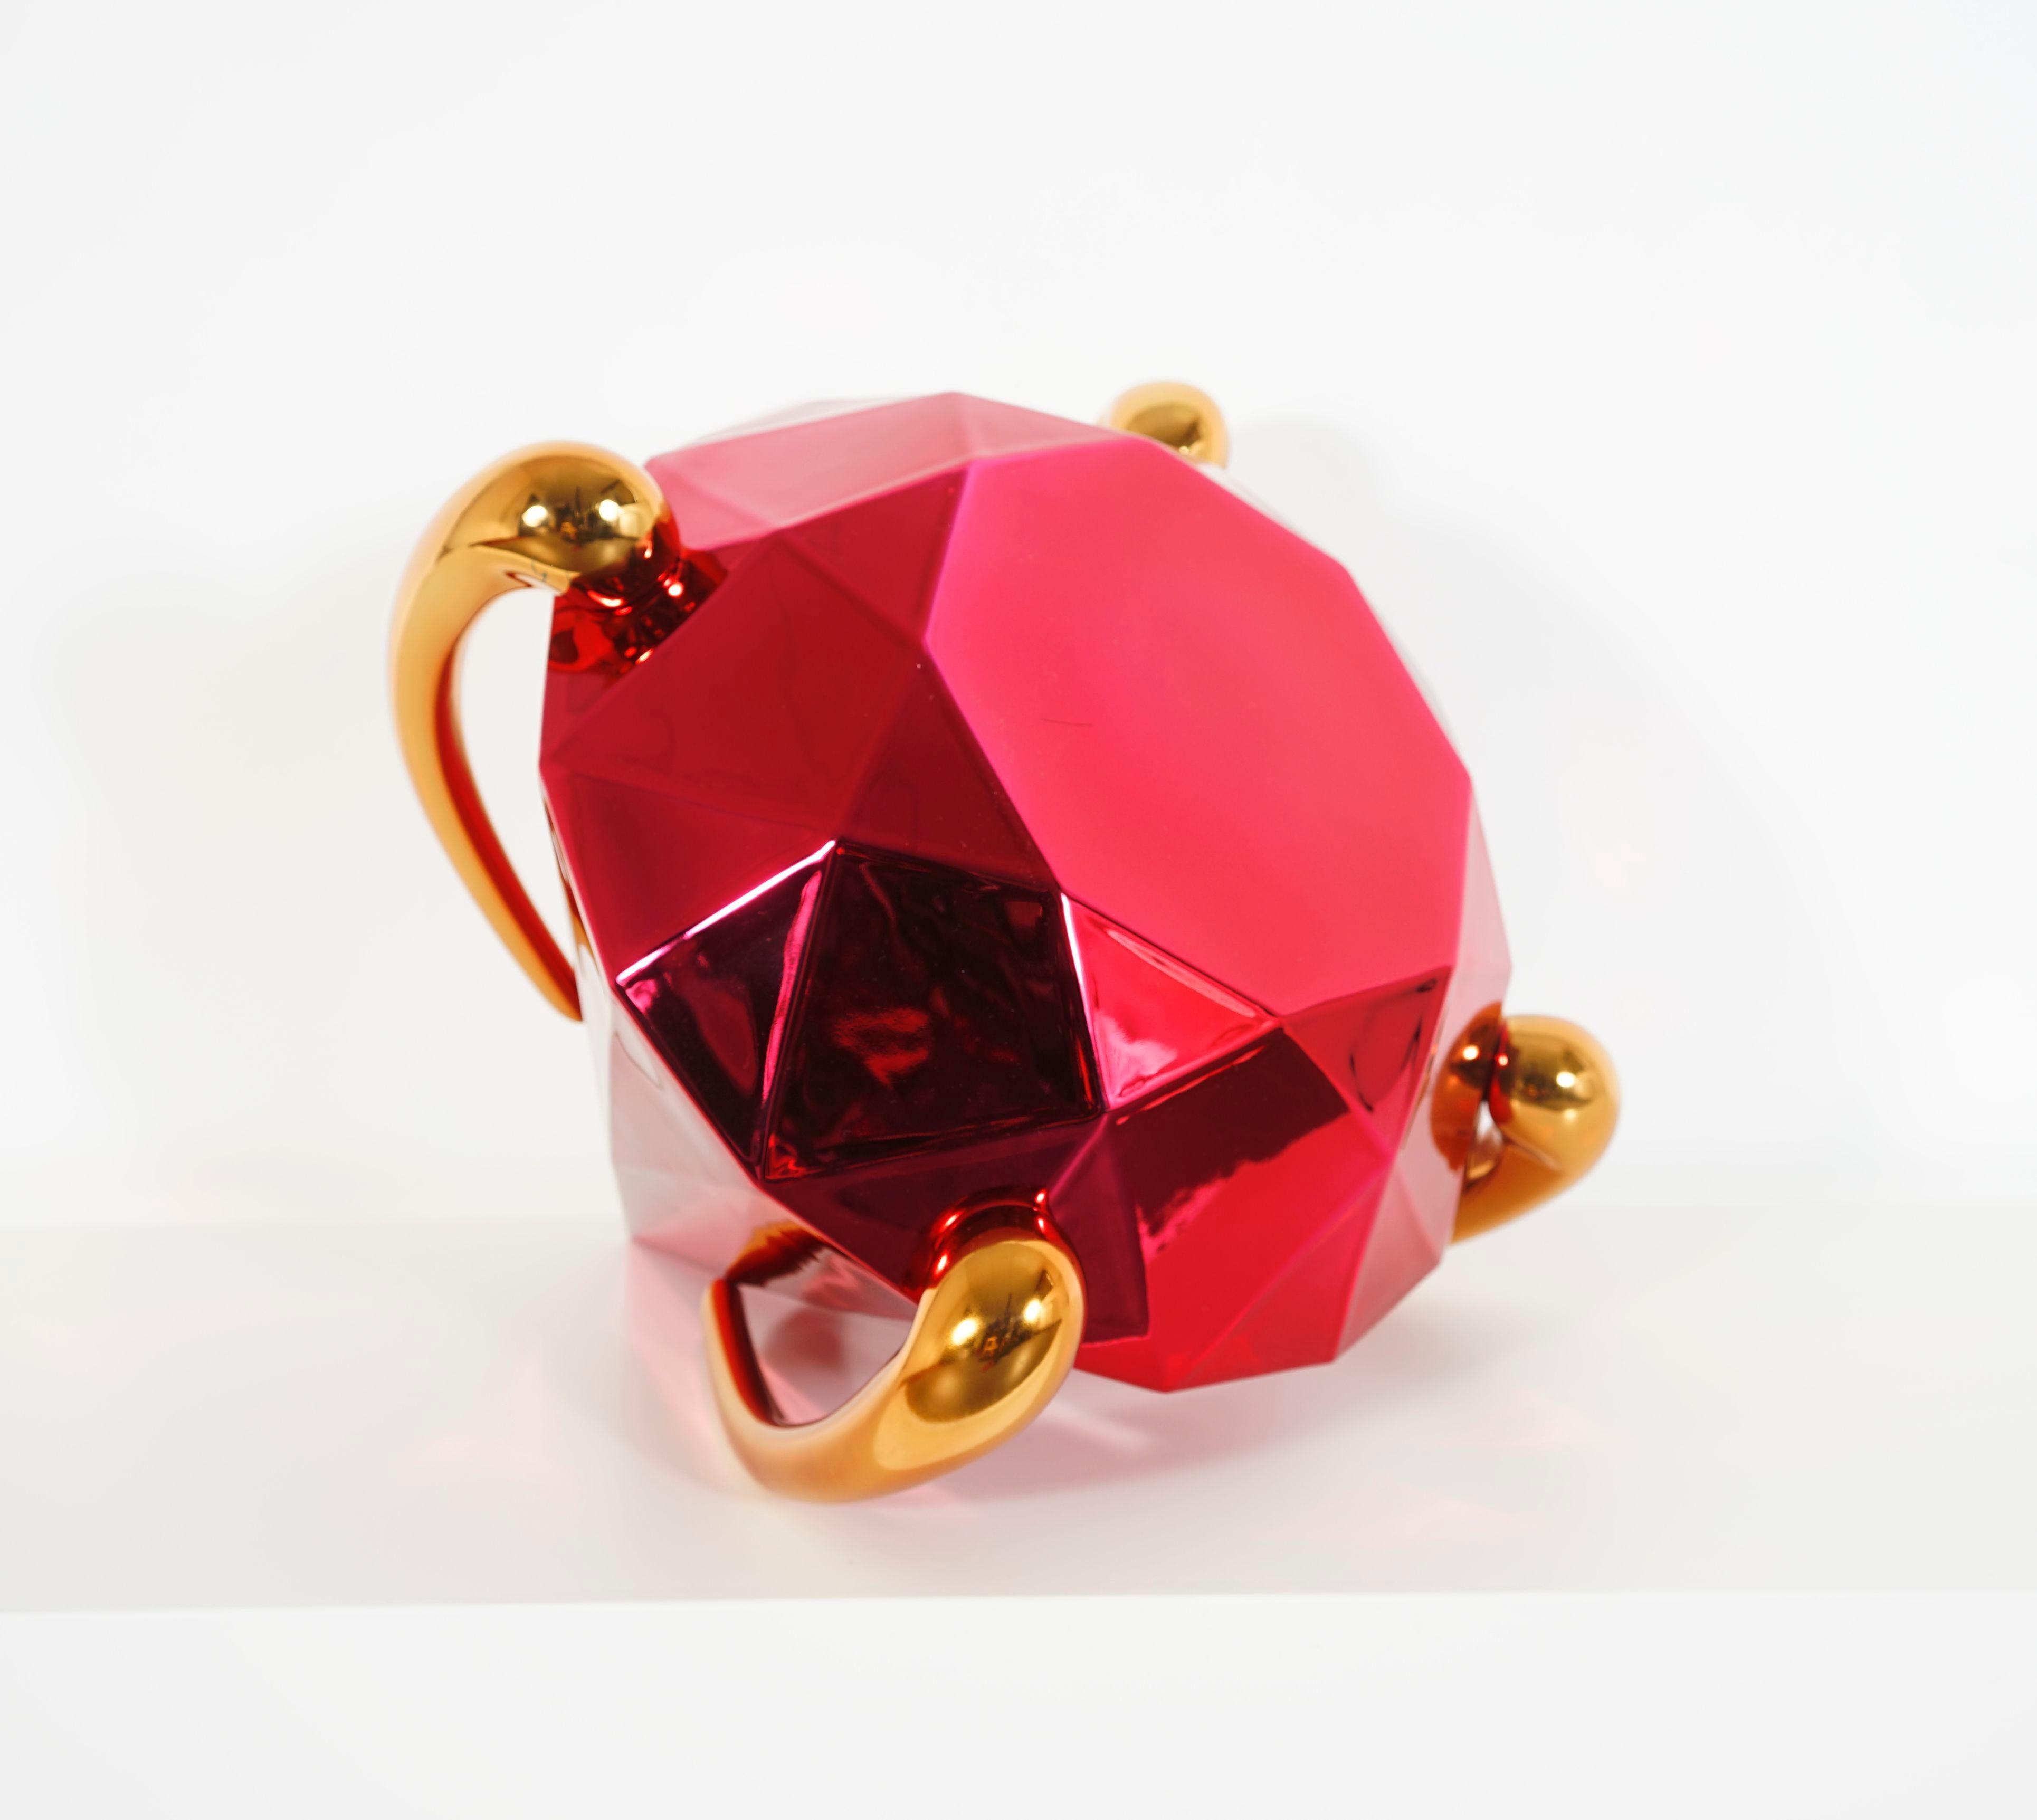 The Diamonds  Collectors' set with matching numbers - Sculpture by Jeff Koons